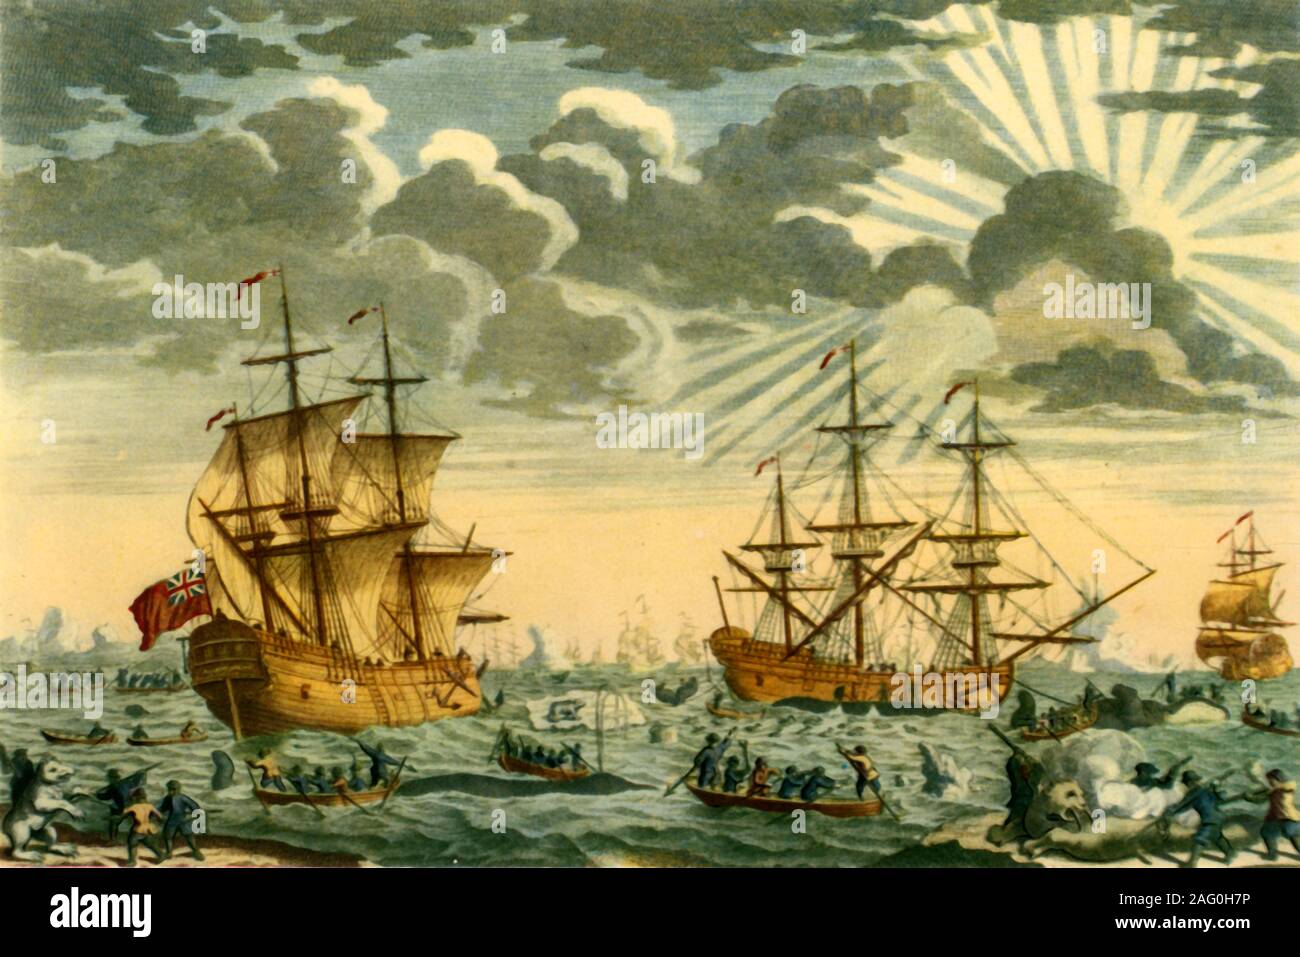 'Whale or Greenland Fishery', 1720, (1946). British whaling ships off the coast of Greenland: sailors in small rowing boats hunt whales with harpoons; men attack a polar bear at bottom left, and a walrus is shot and clubbed on the right. From &quot;British Polar Explorers&quot;, by Admiral Sir Edward Evans. [Collins, London, 1946] Stock Photo